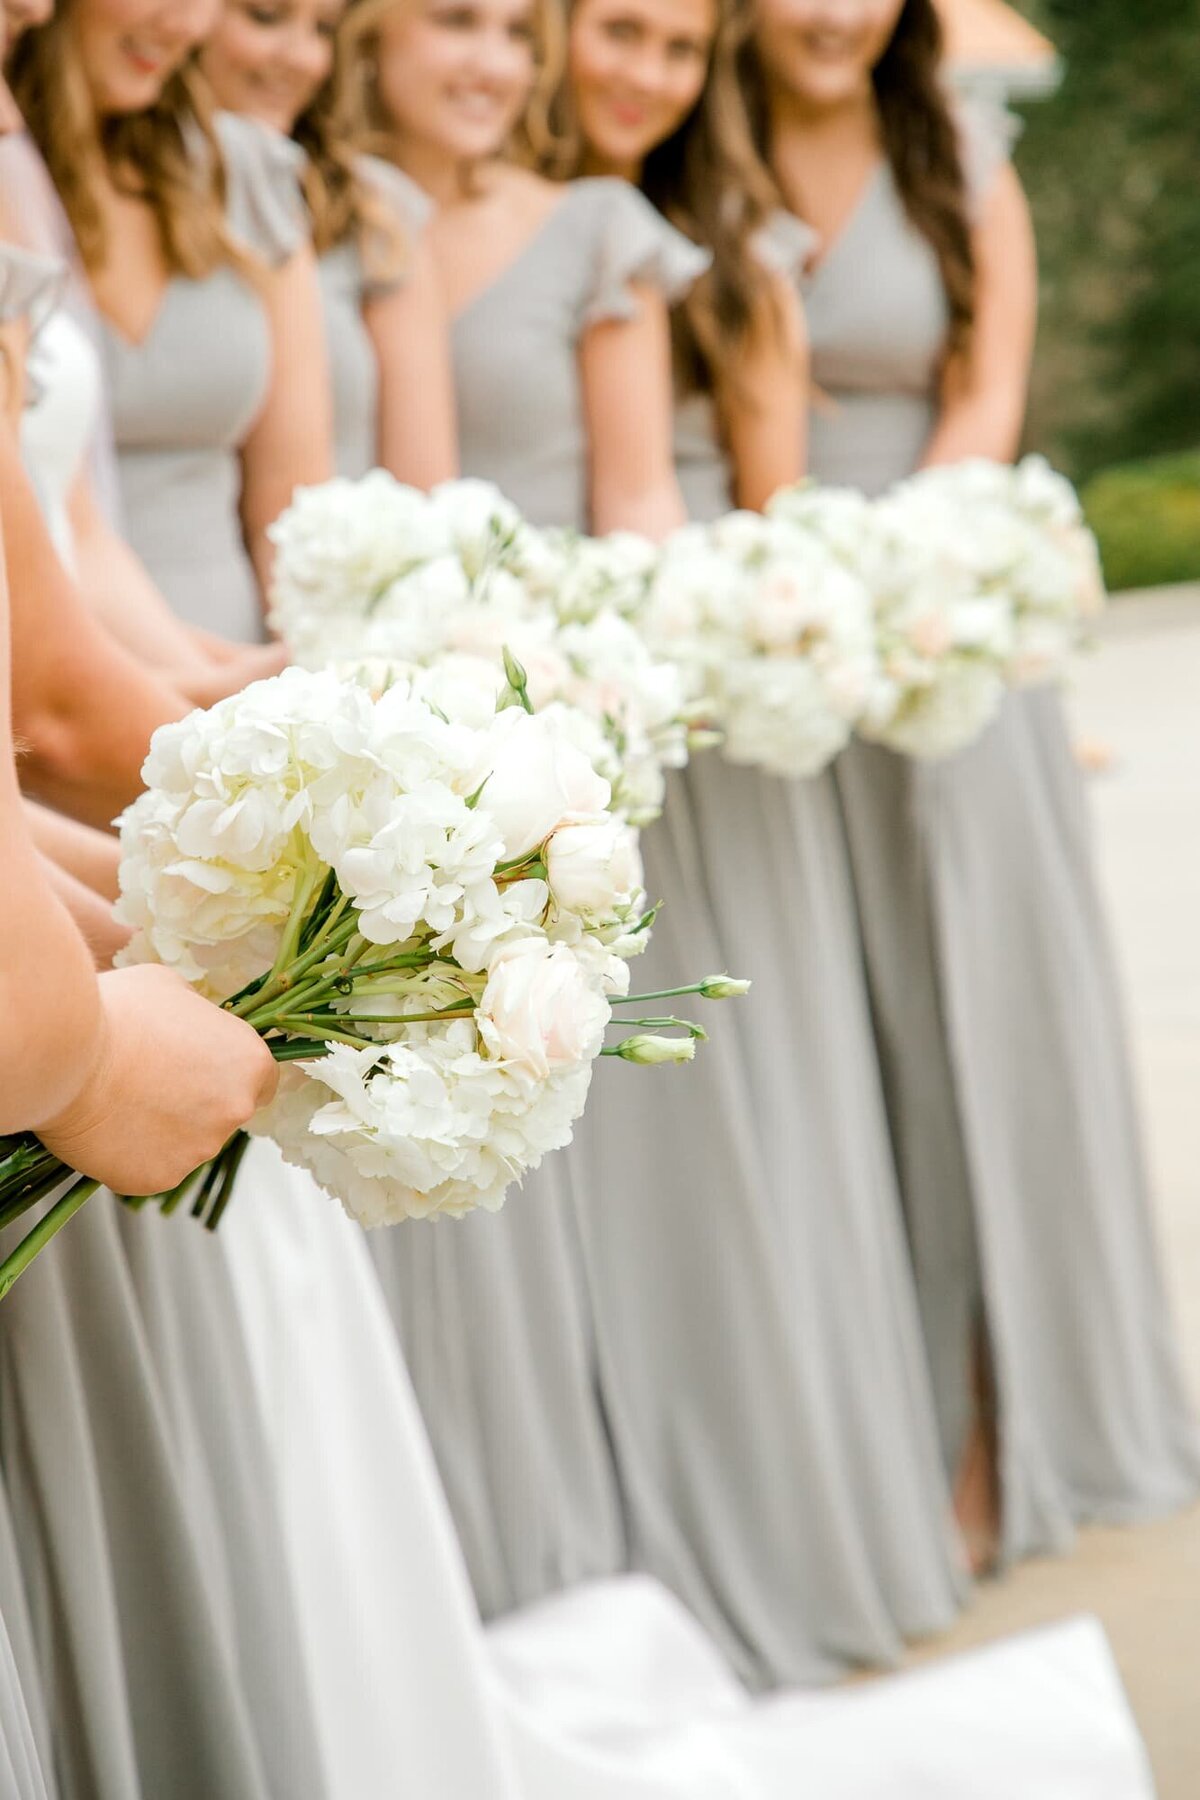 Bridesmaids in gray dresses with white flowers